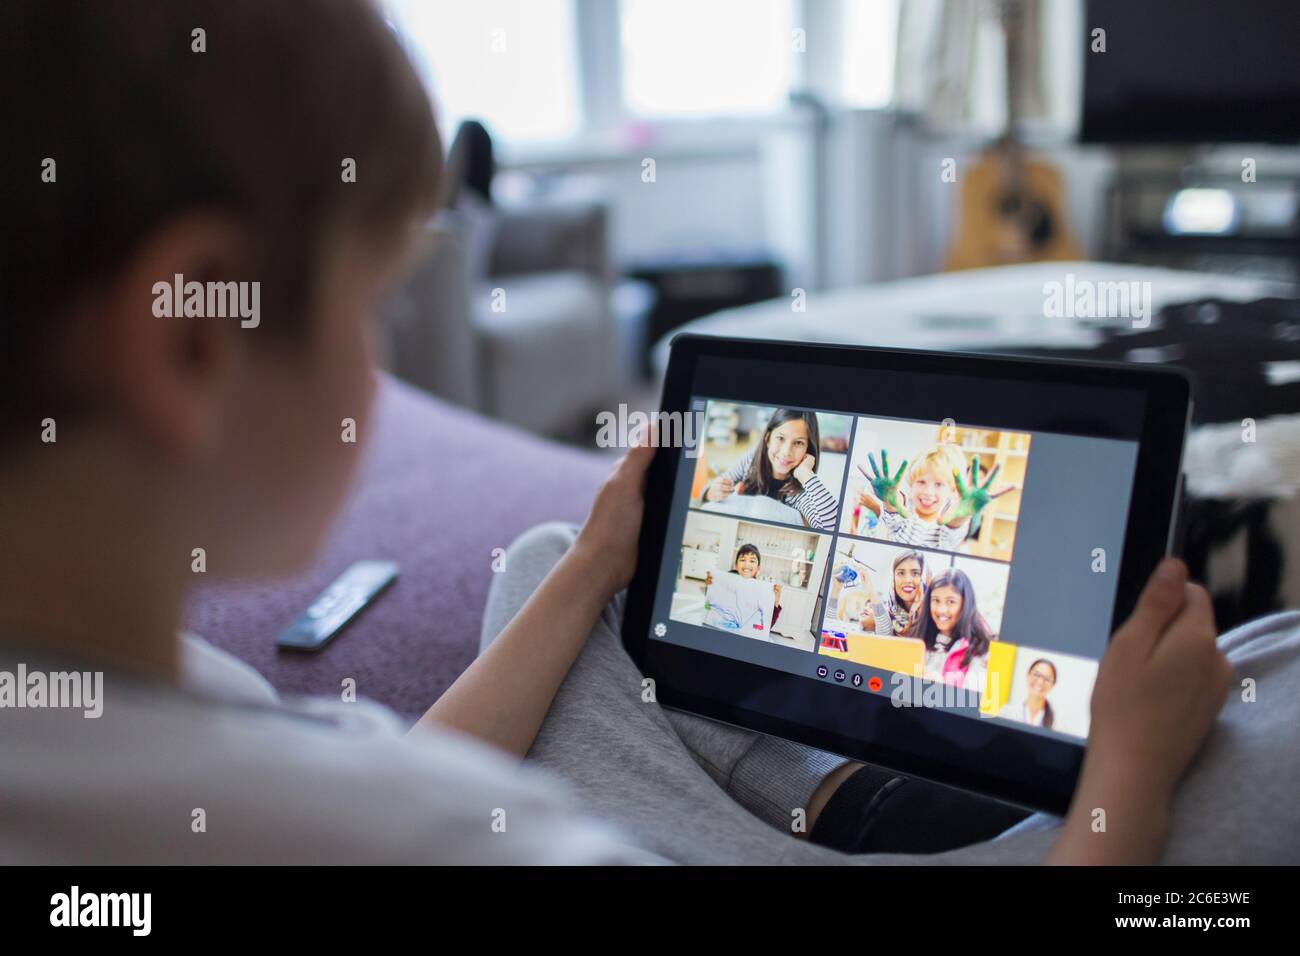 Boy with digital tablet e-learning on sofa Stock Photo